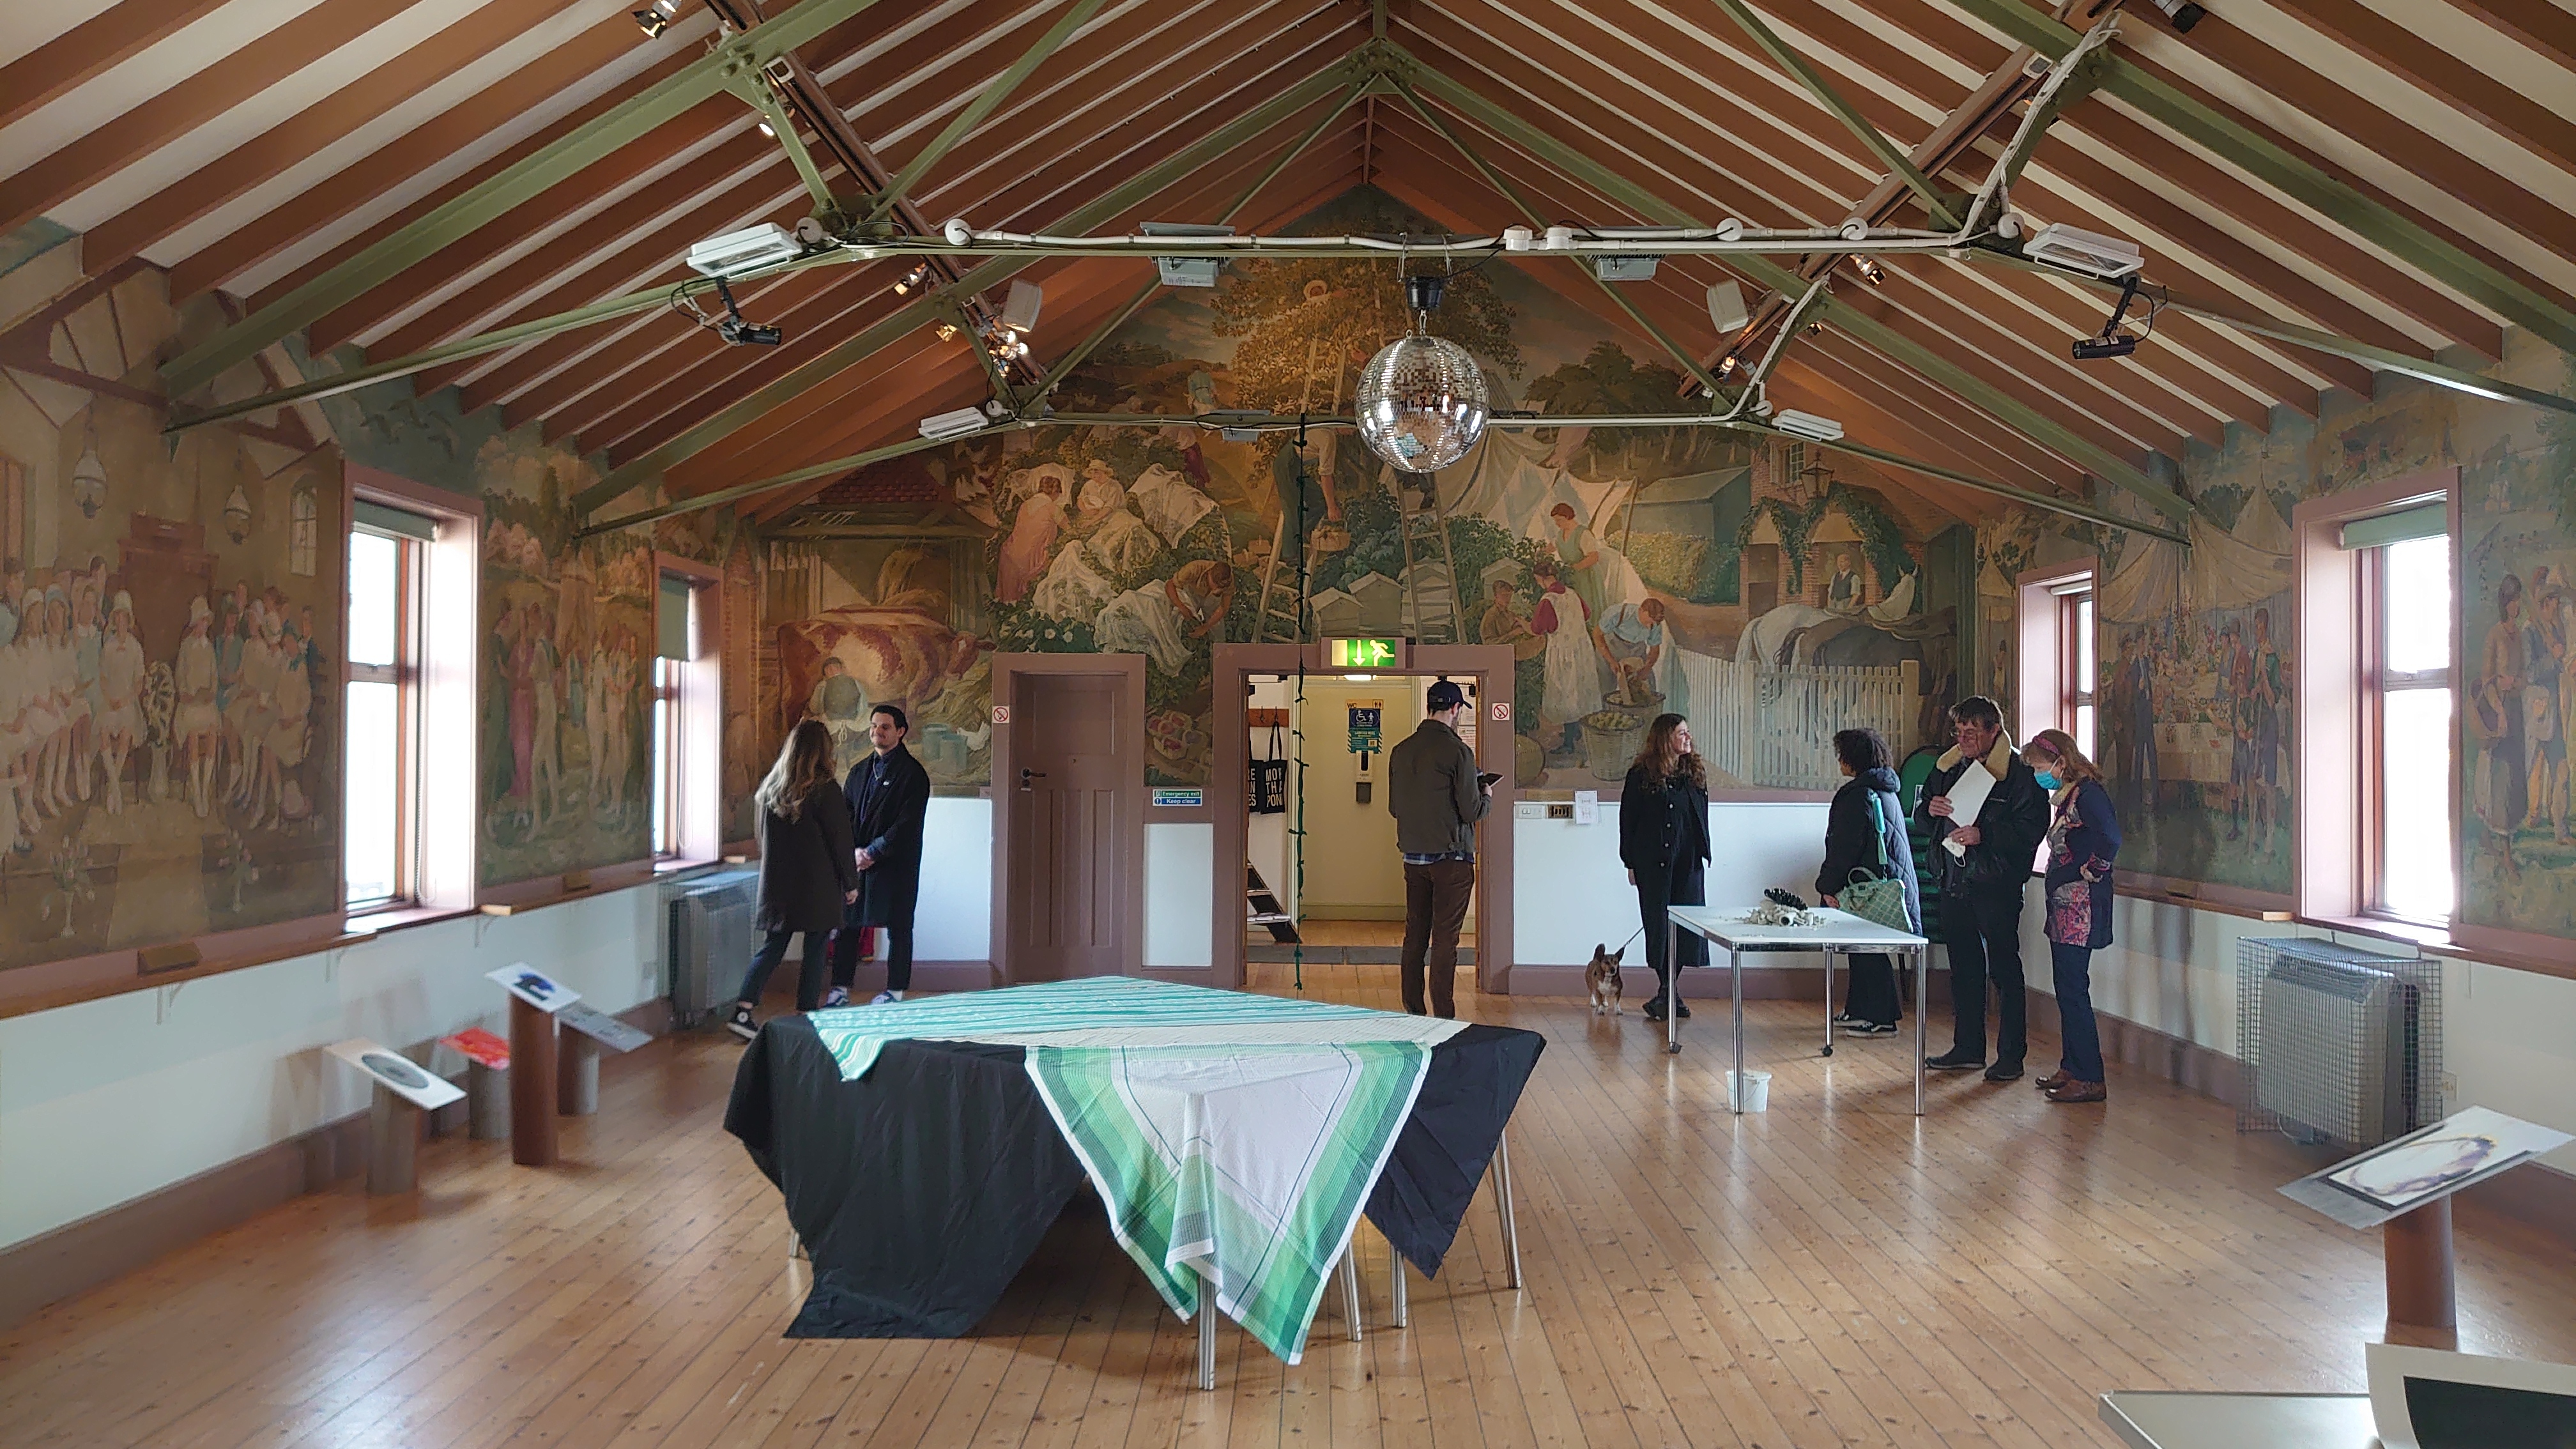 A small group of people are standing in a room with wooden beams and decorative wallpapered walls. There is a table in the centre if the images with a colourful tablecloth draped over it and a disco ball hanging from the ceiling